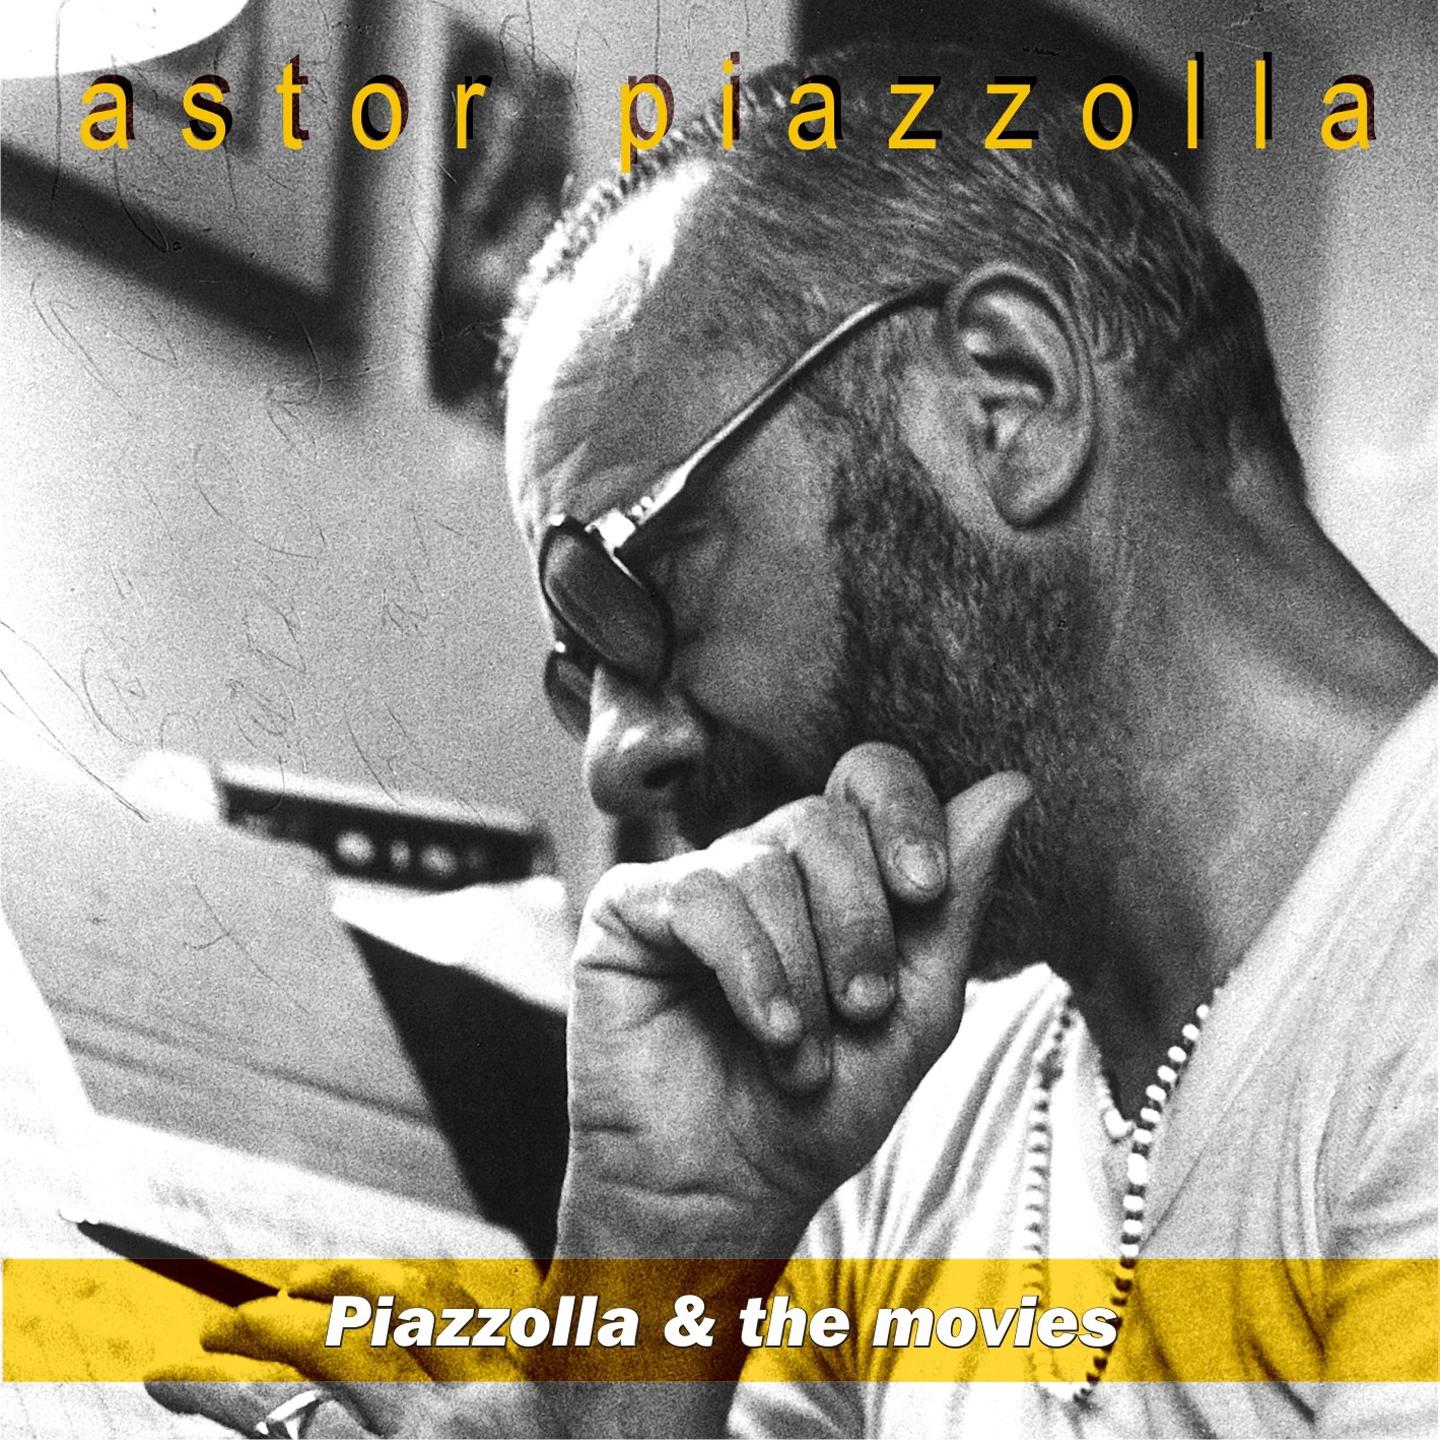 Piazzolla & the Movies